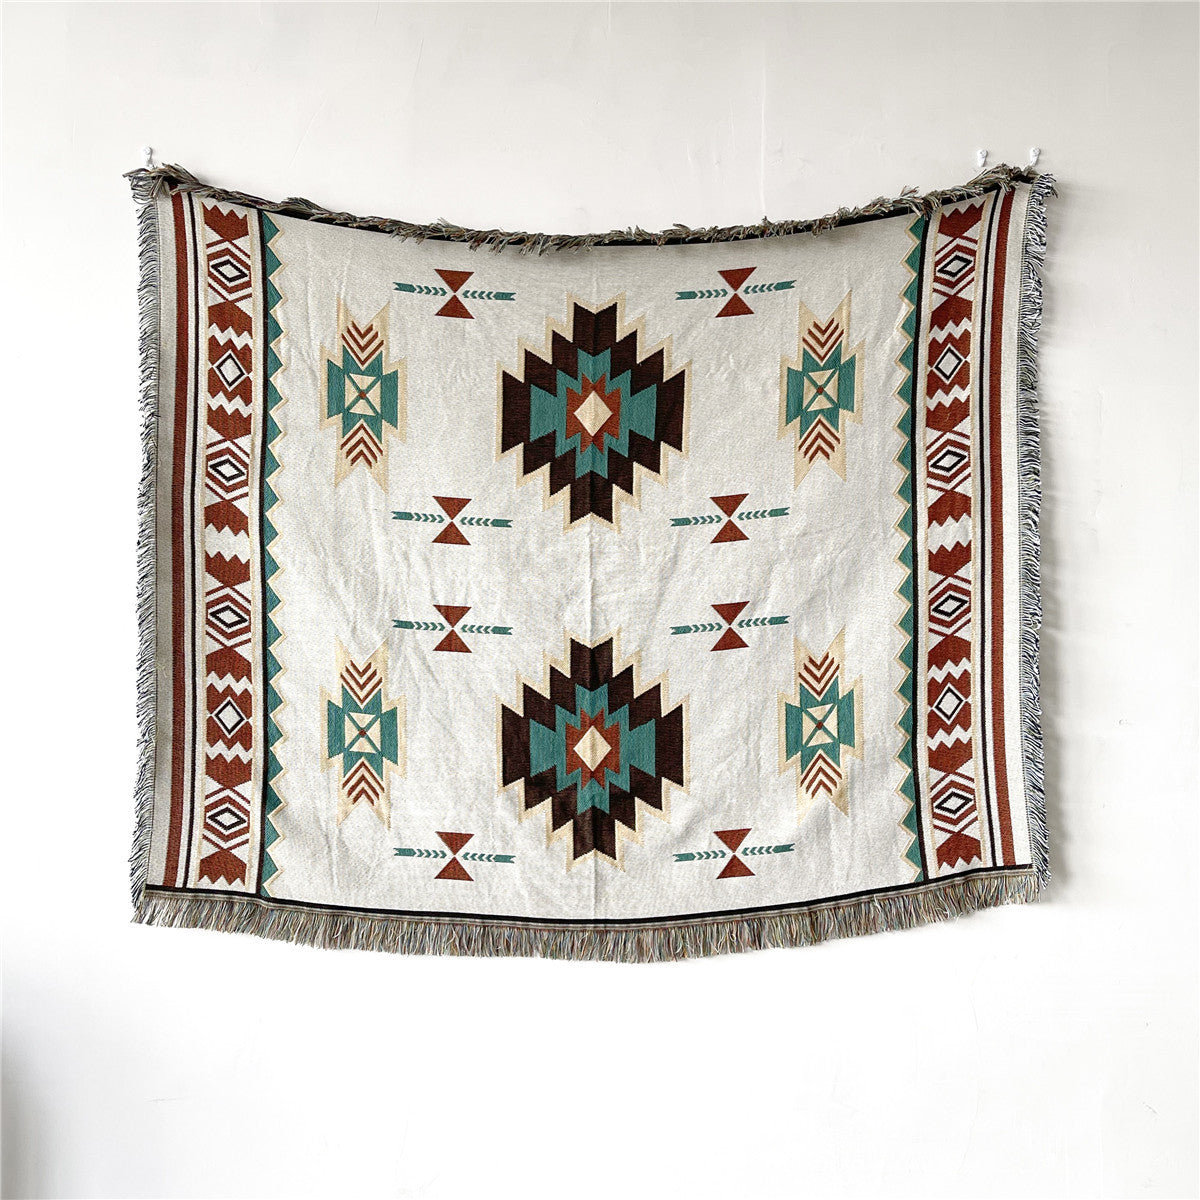 Bohemian Tapestry Sofa Blanket: Add Style and Comfort to Your Living Space